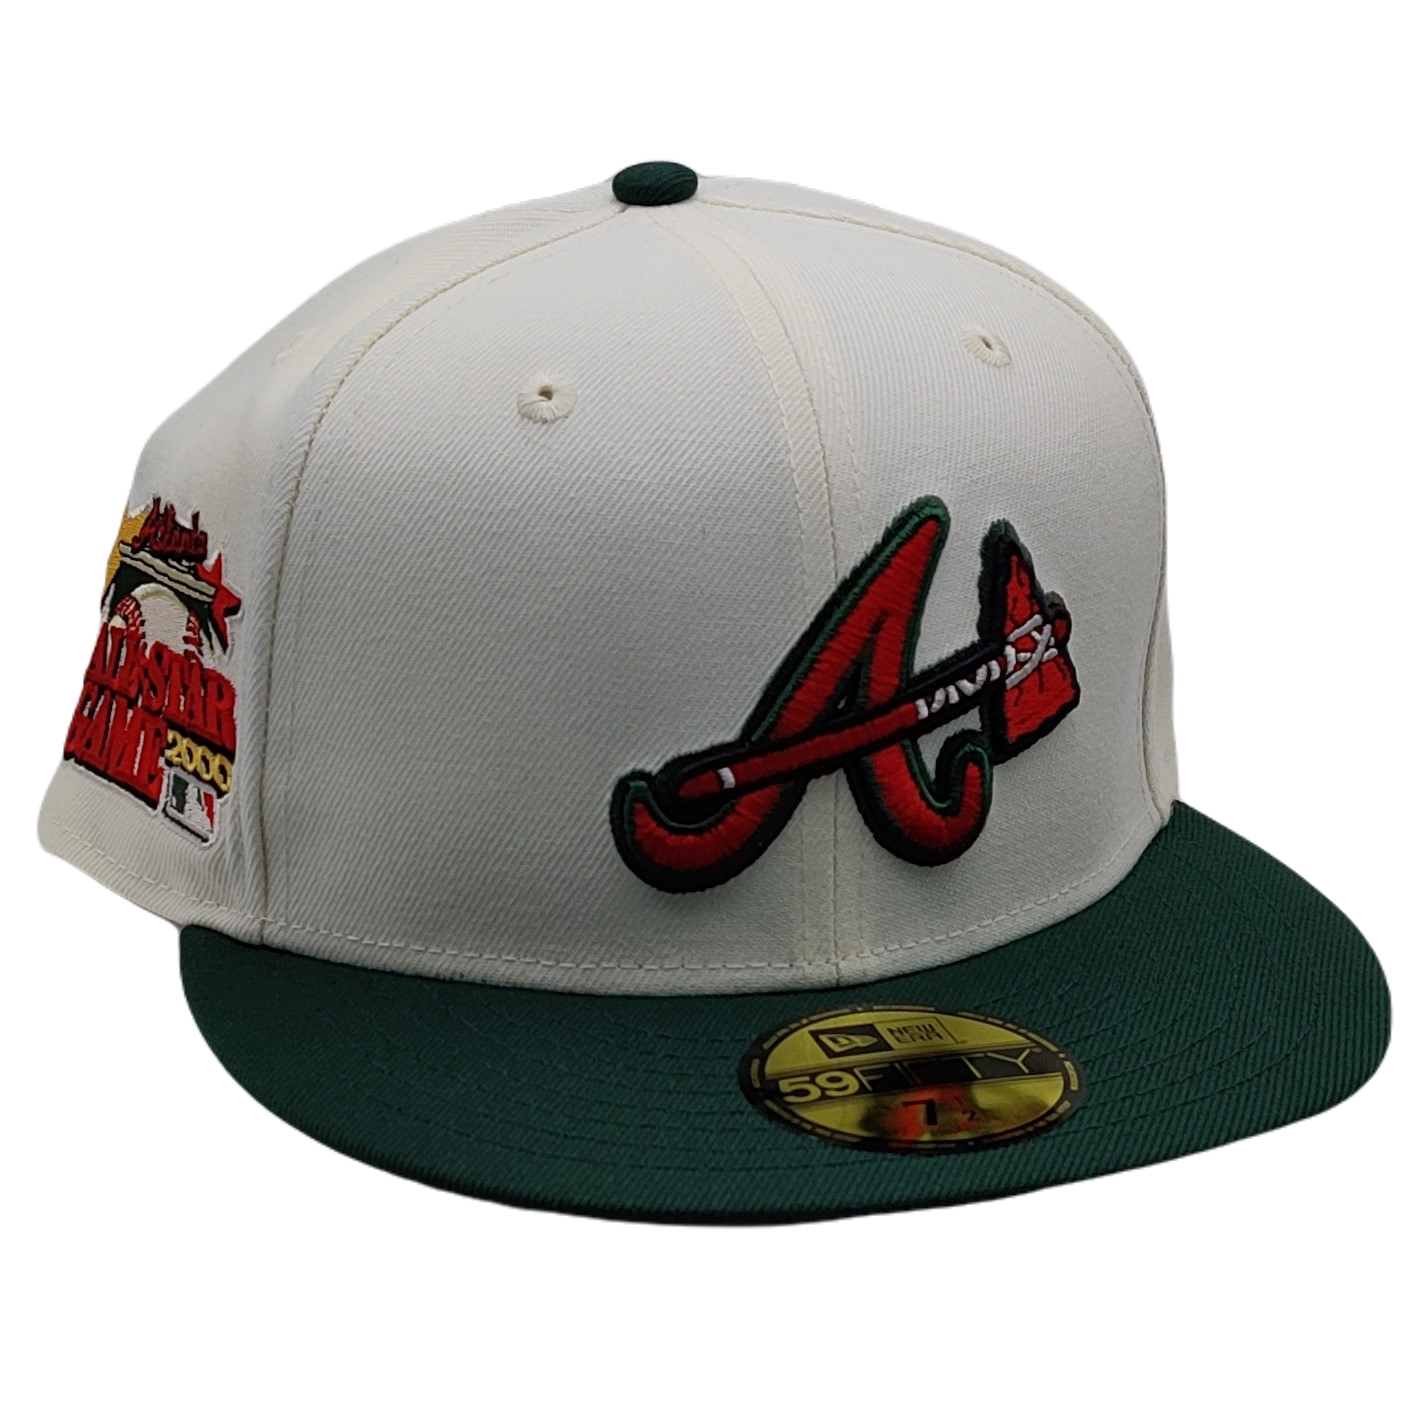 Atlanta Braves Cap Logo (2003) - Red A with tomahawk on blue